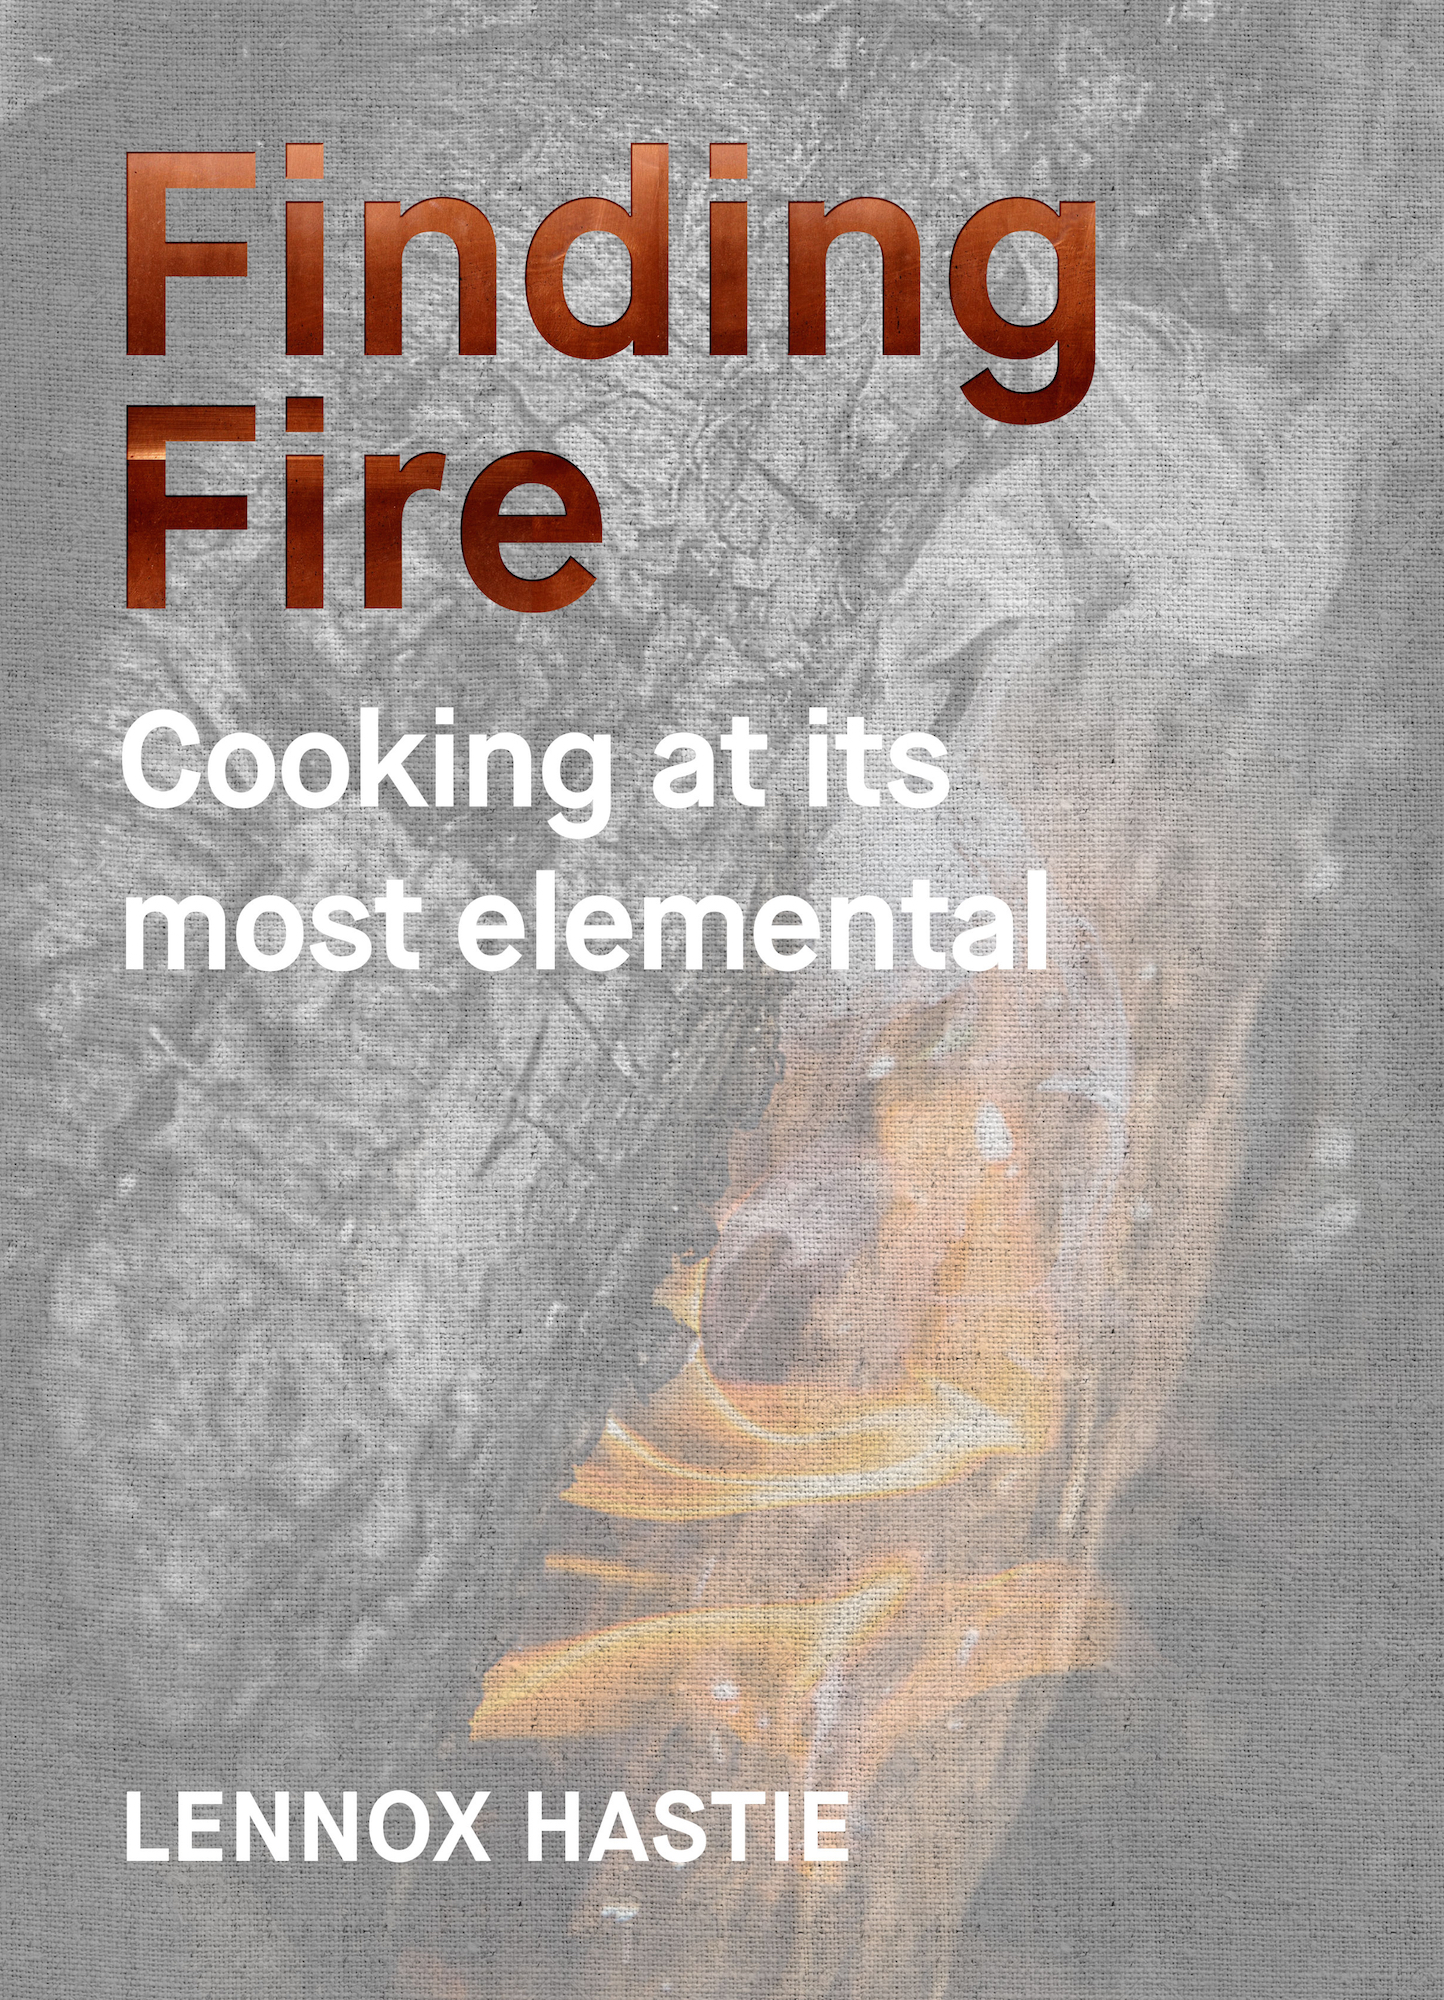 Finding Fire